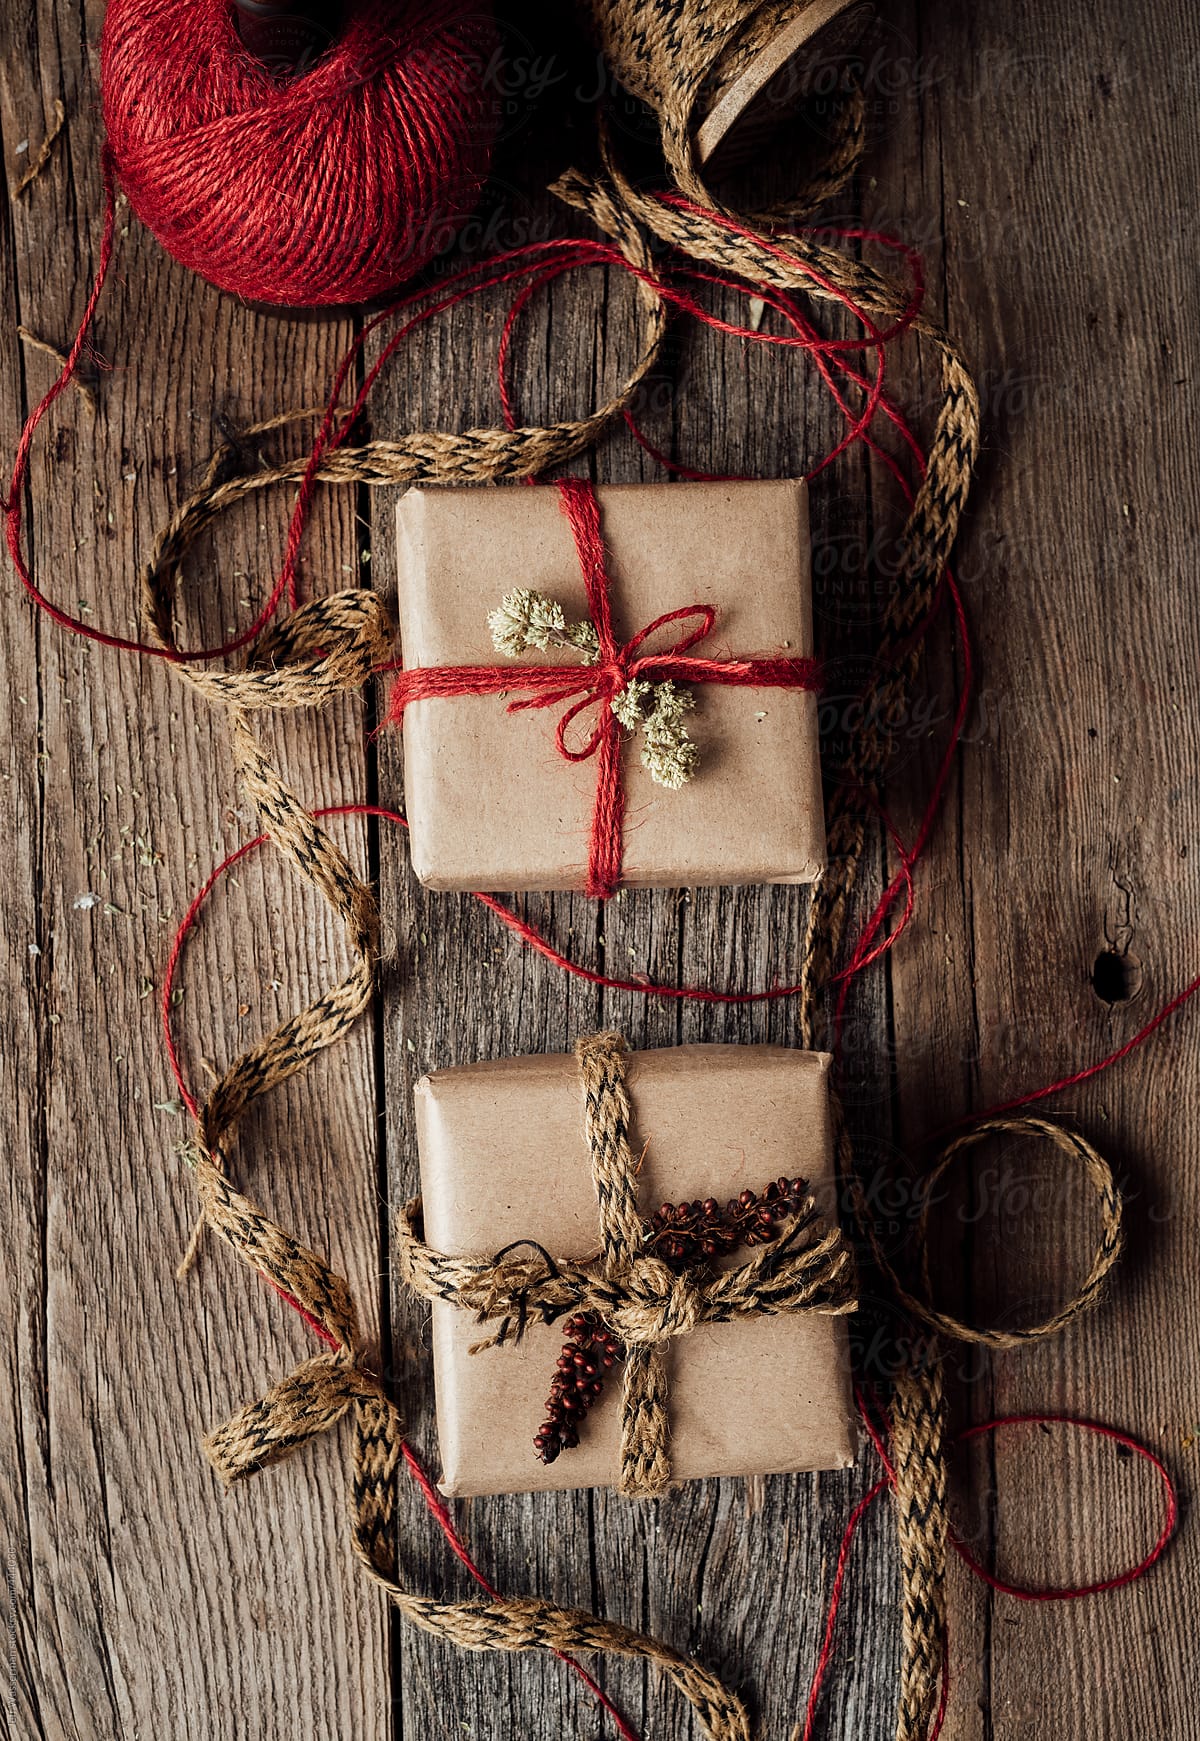 Two Rustic Christmas Gifts with Twine